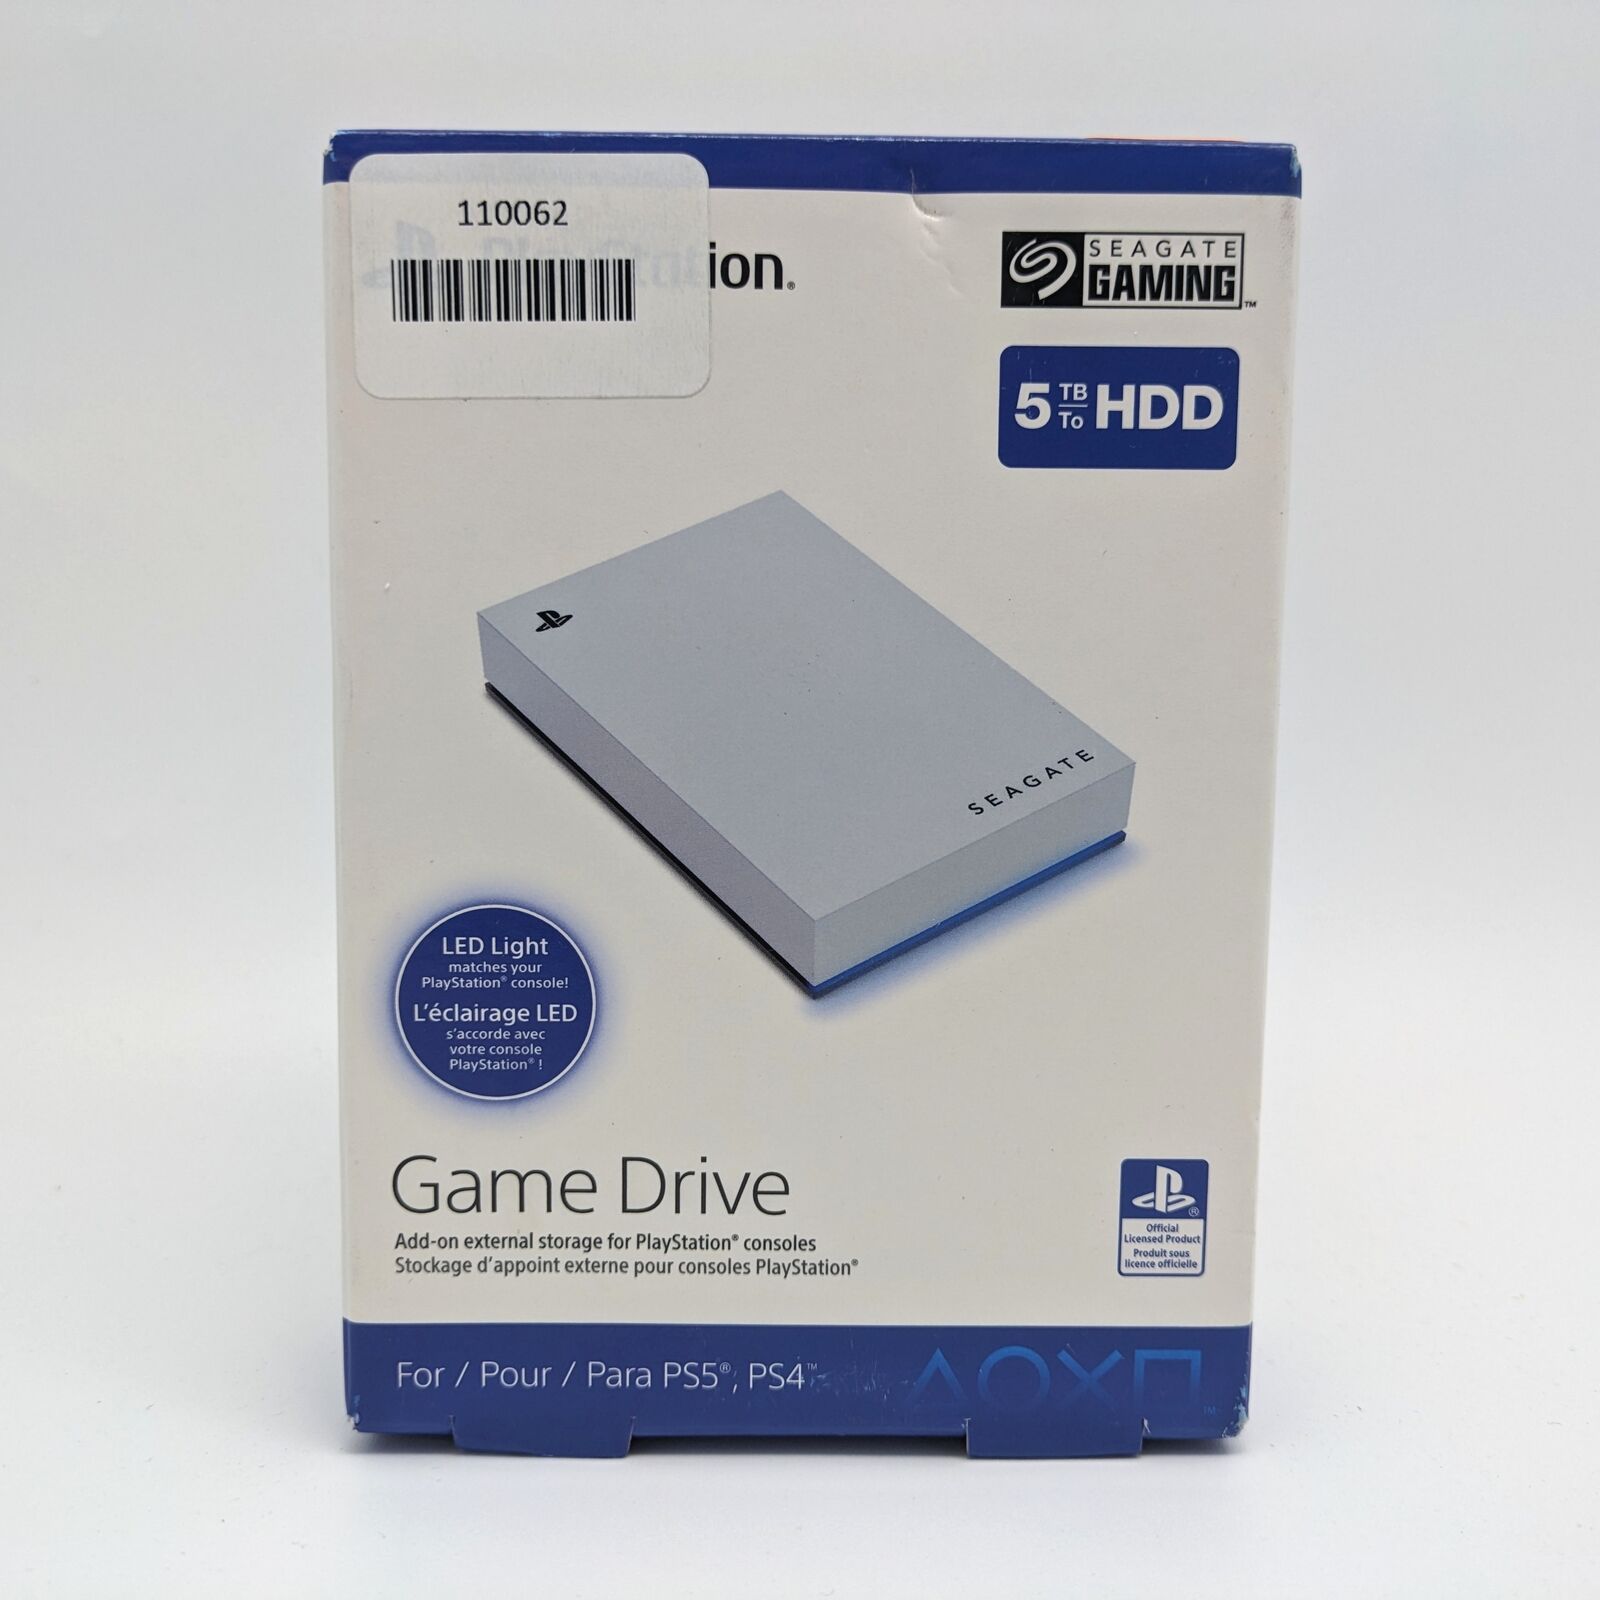 Seagate Game Drive 5TB External Hard Drive For PS5, PS4 (STLV5000100)